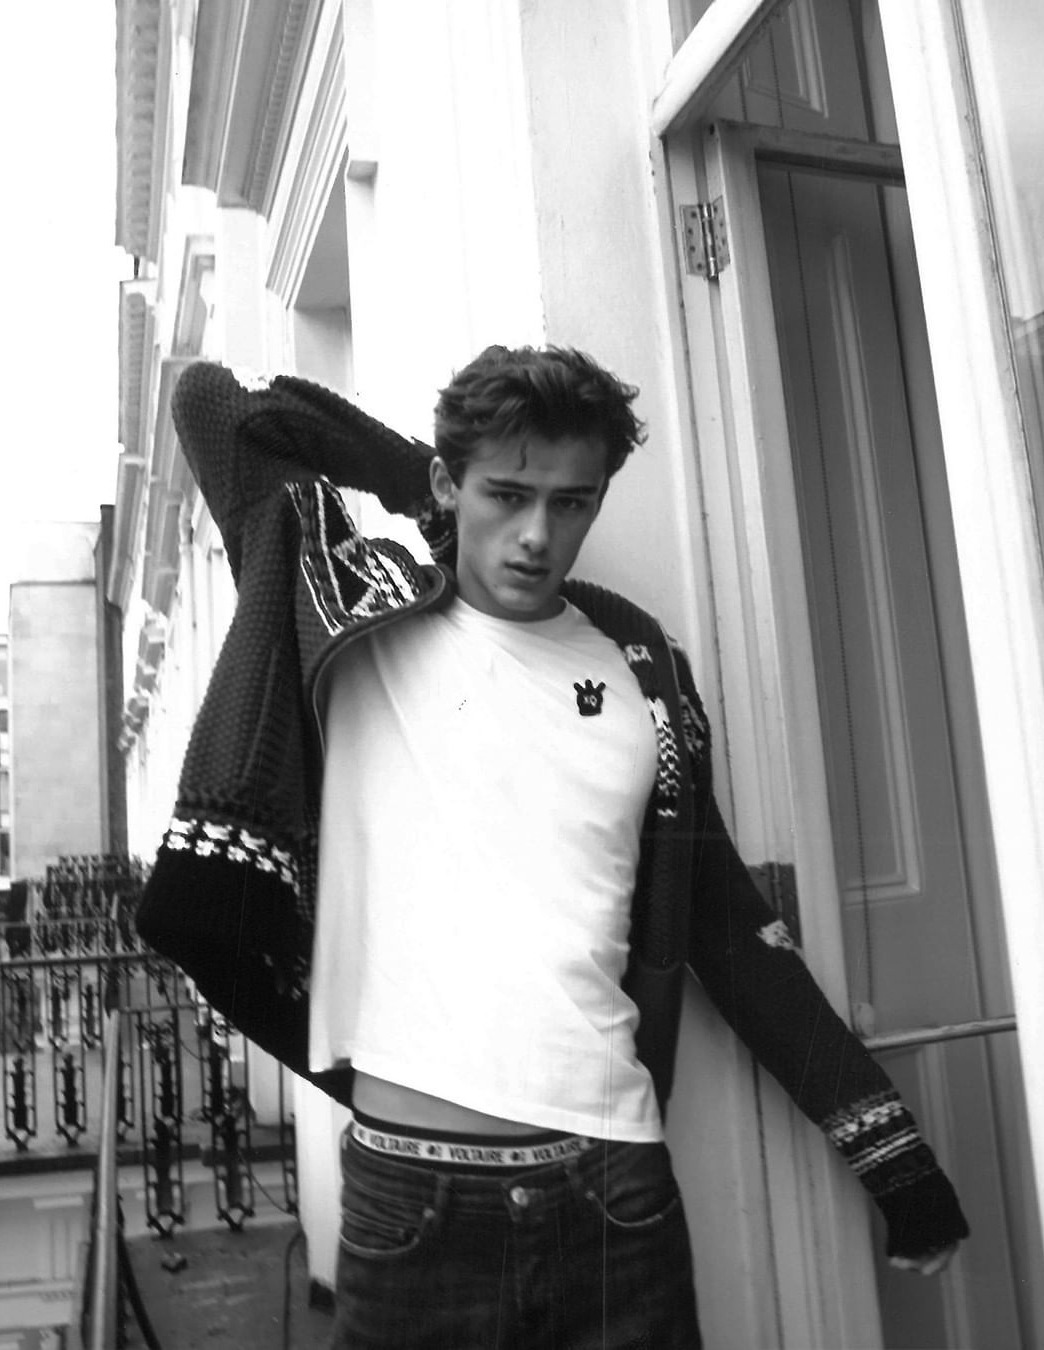 vogueman:
“William Franklyn-Miller for Zadig&Voltaire. William wears Cardigan, t-shirt, pants and shorts Zadig&Voltaire
”